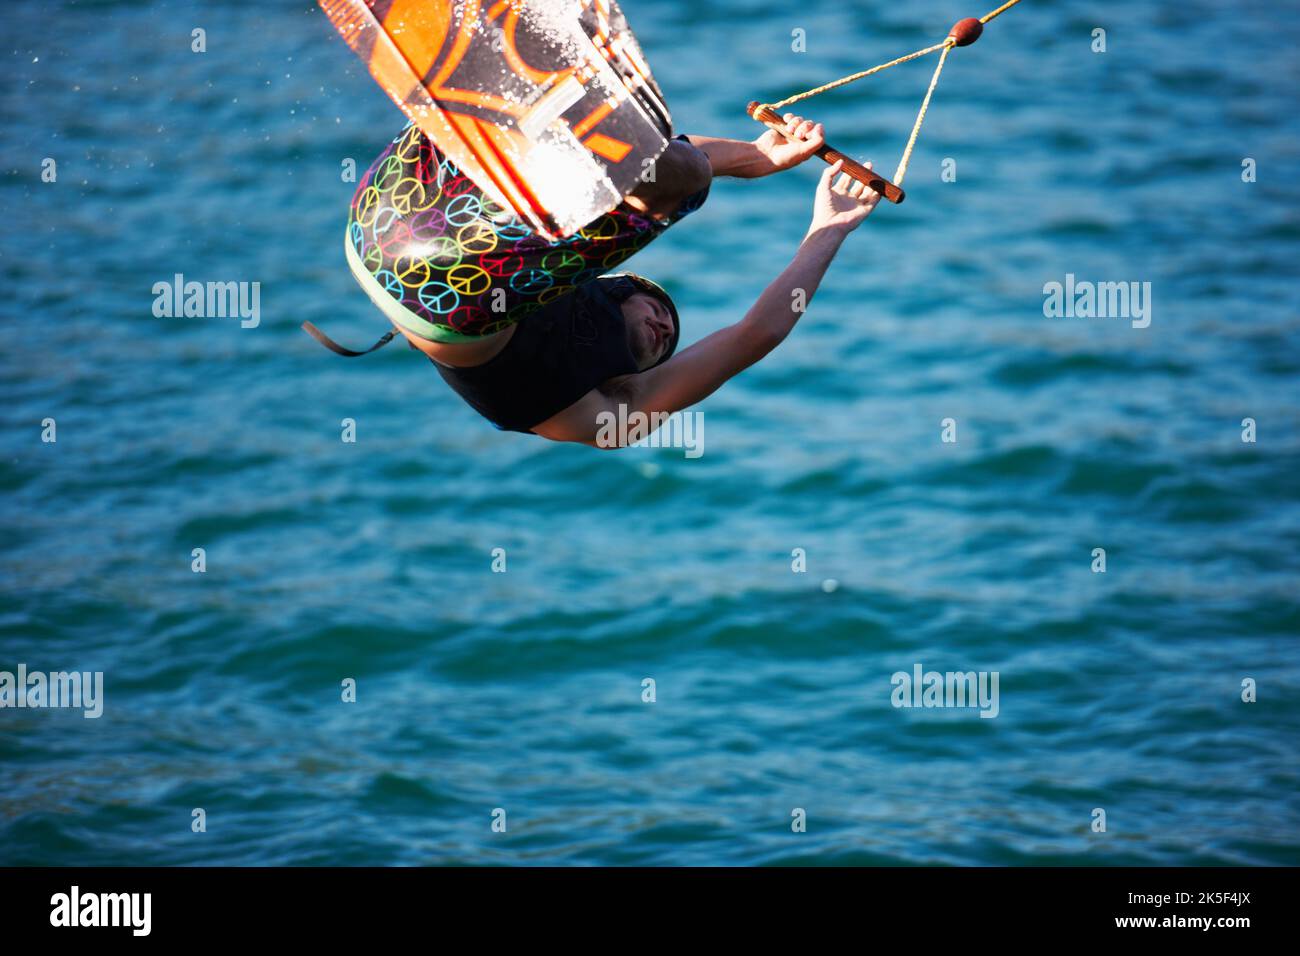 A young man wearing a helmut and lifejacket wakeboarding on a lake Stock Photo